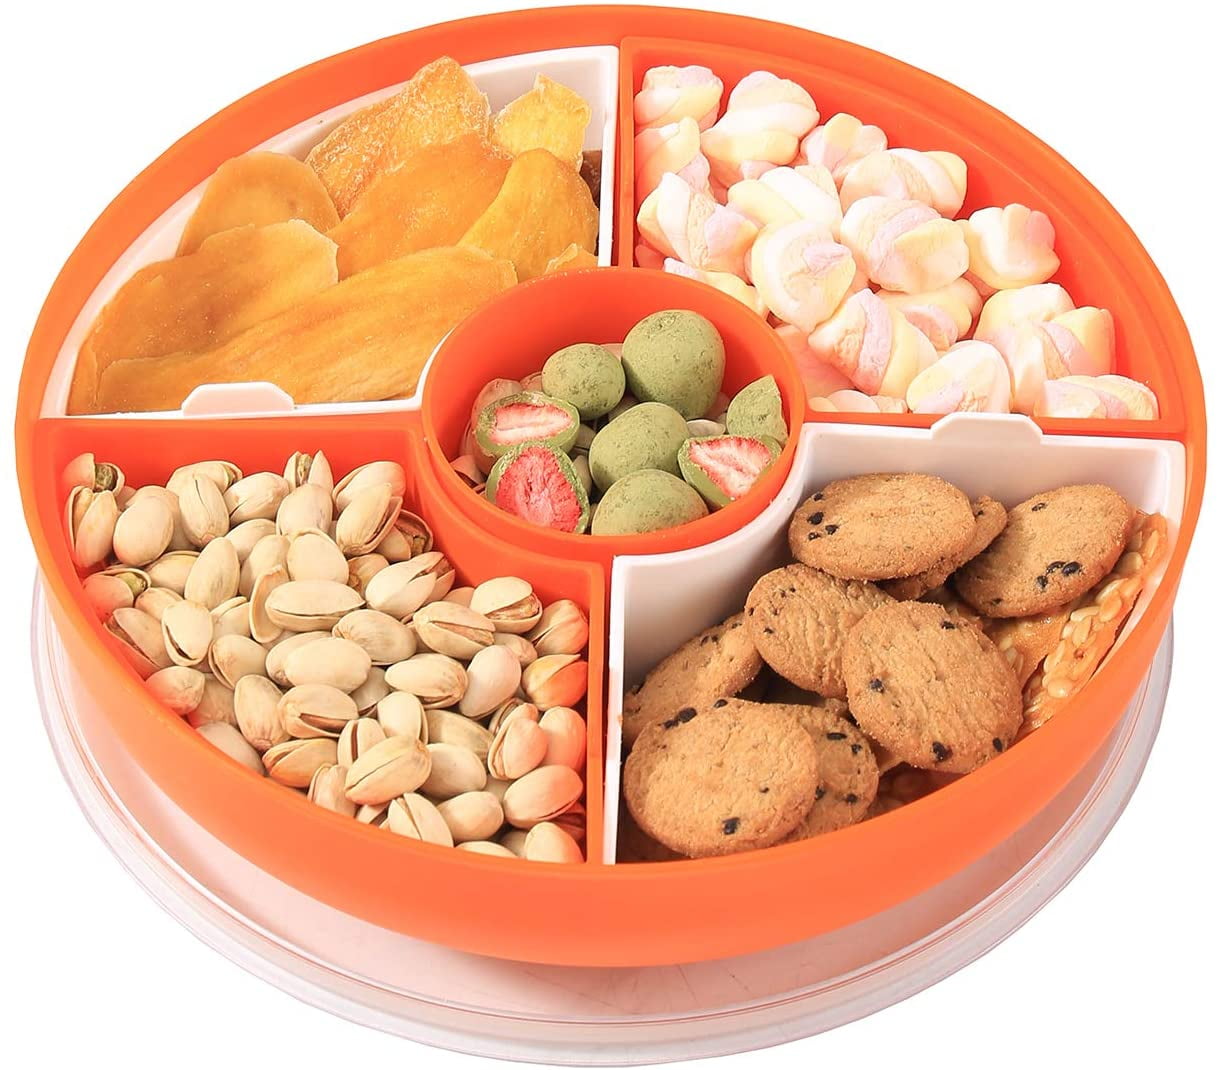 Blue XKXKKE Divided Serving Dishes with Lid,Serving Bowls,Multifunctional Party Snack Tray for Fruits,Nuts,Candies,Crackers,Veggies